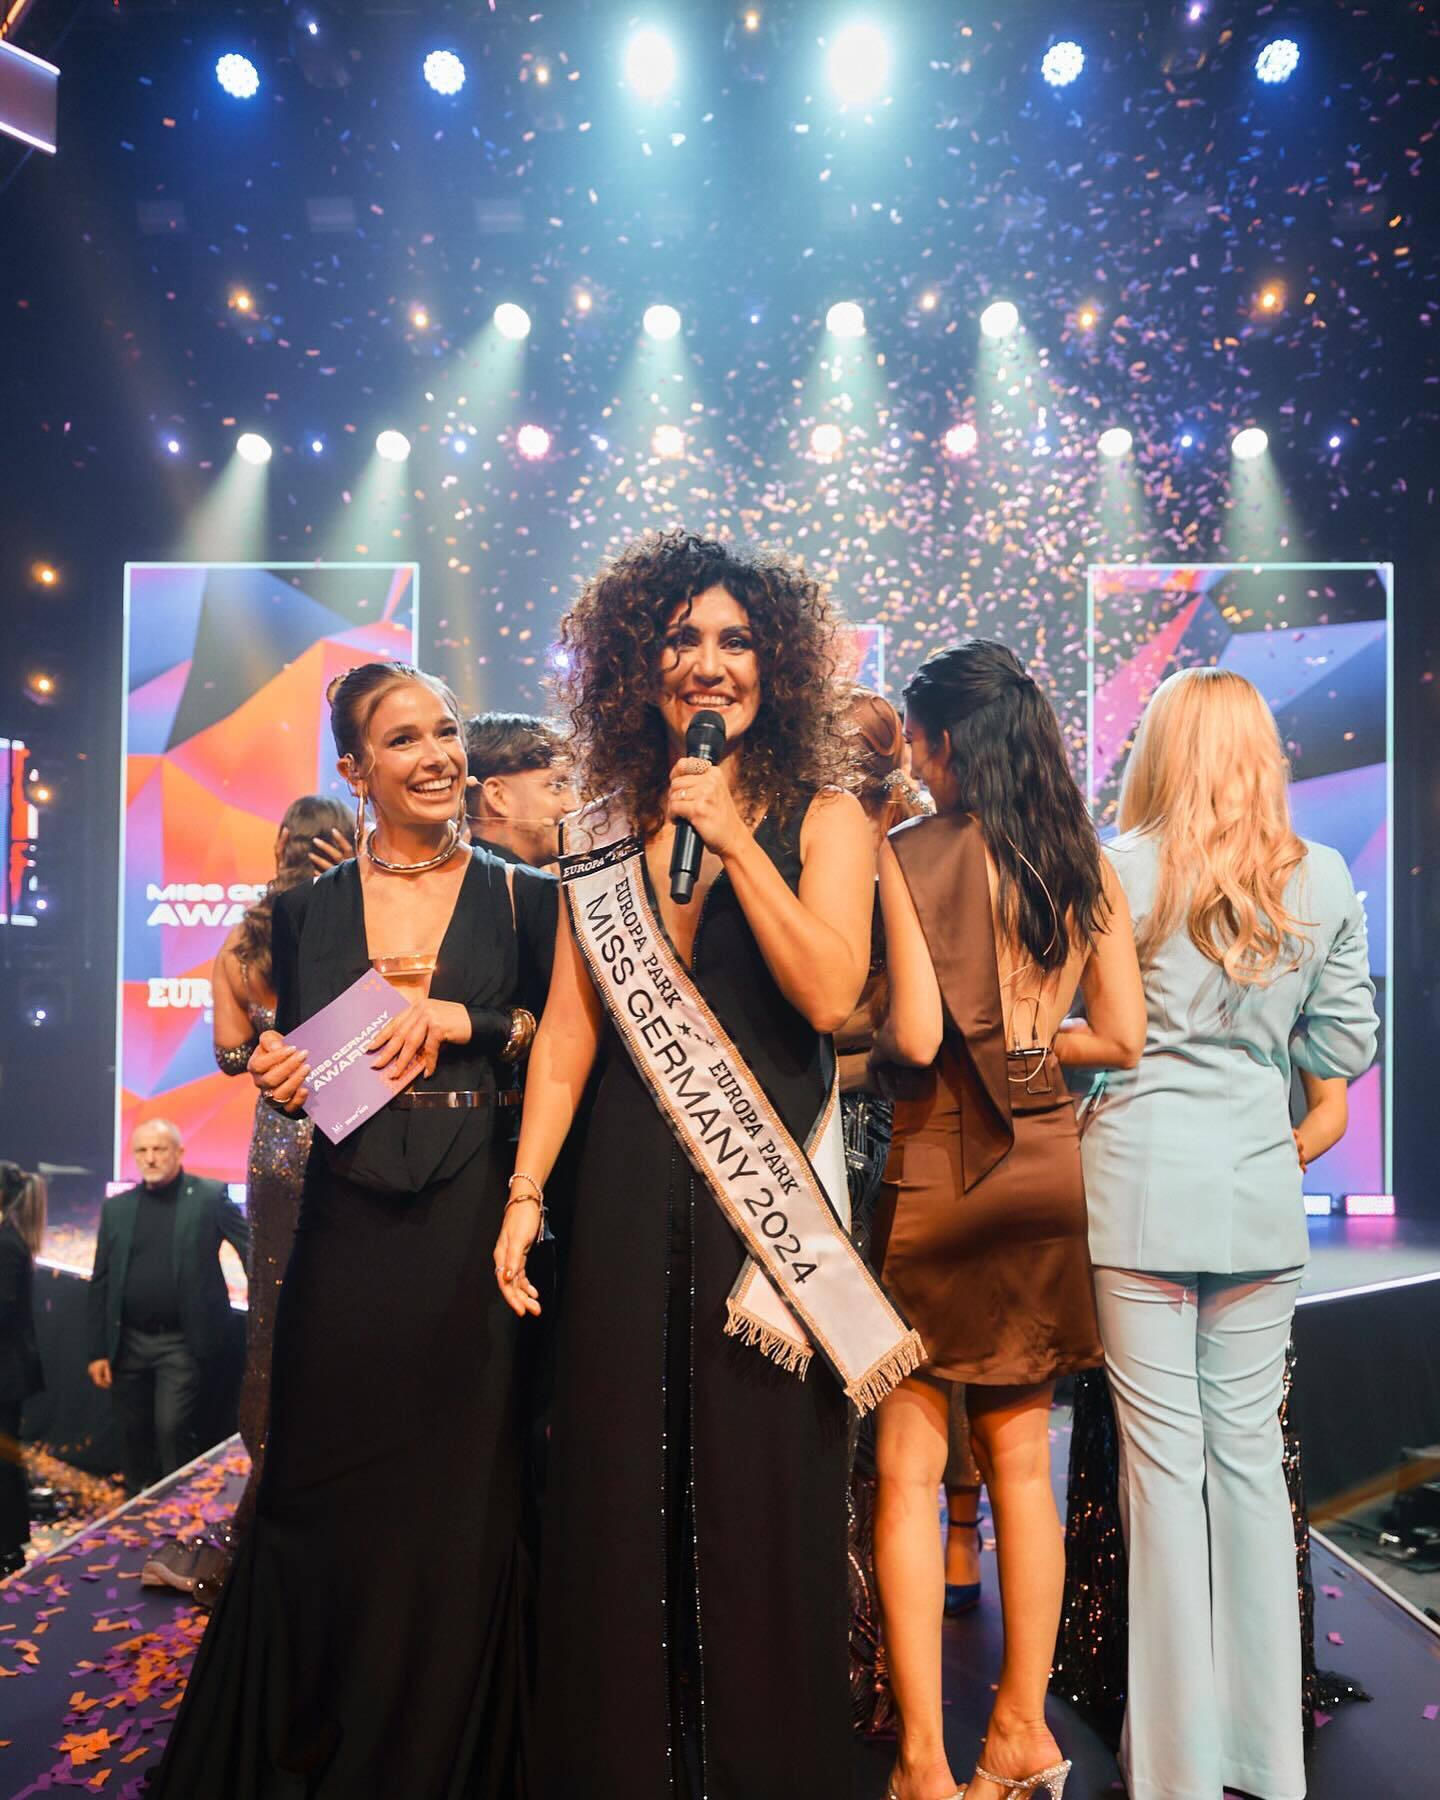 ''It has nothing to do with a beauty contest''. The 39-year-old Miss Germany 2024, who is from Iran, has sparked a discussion online